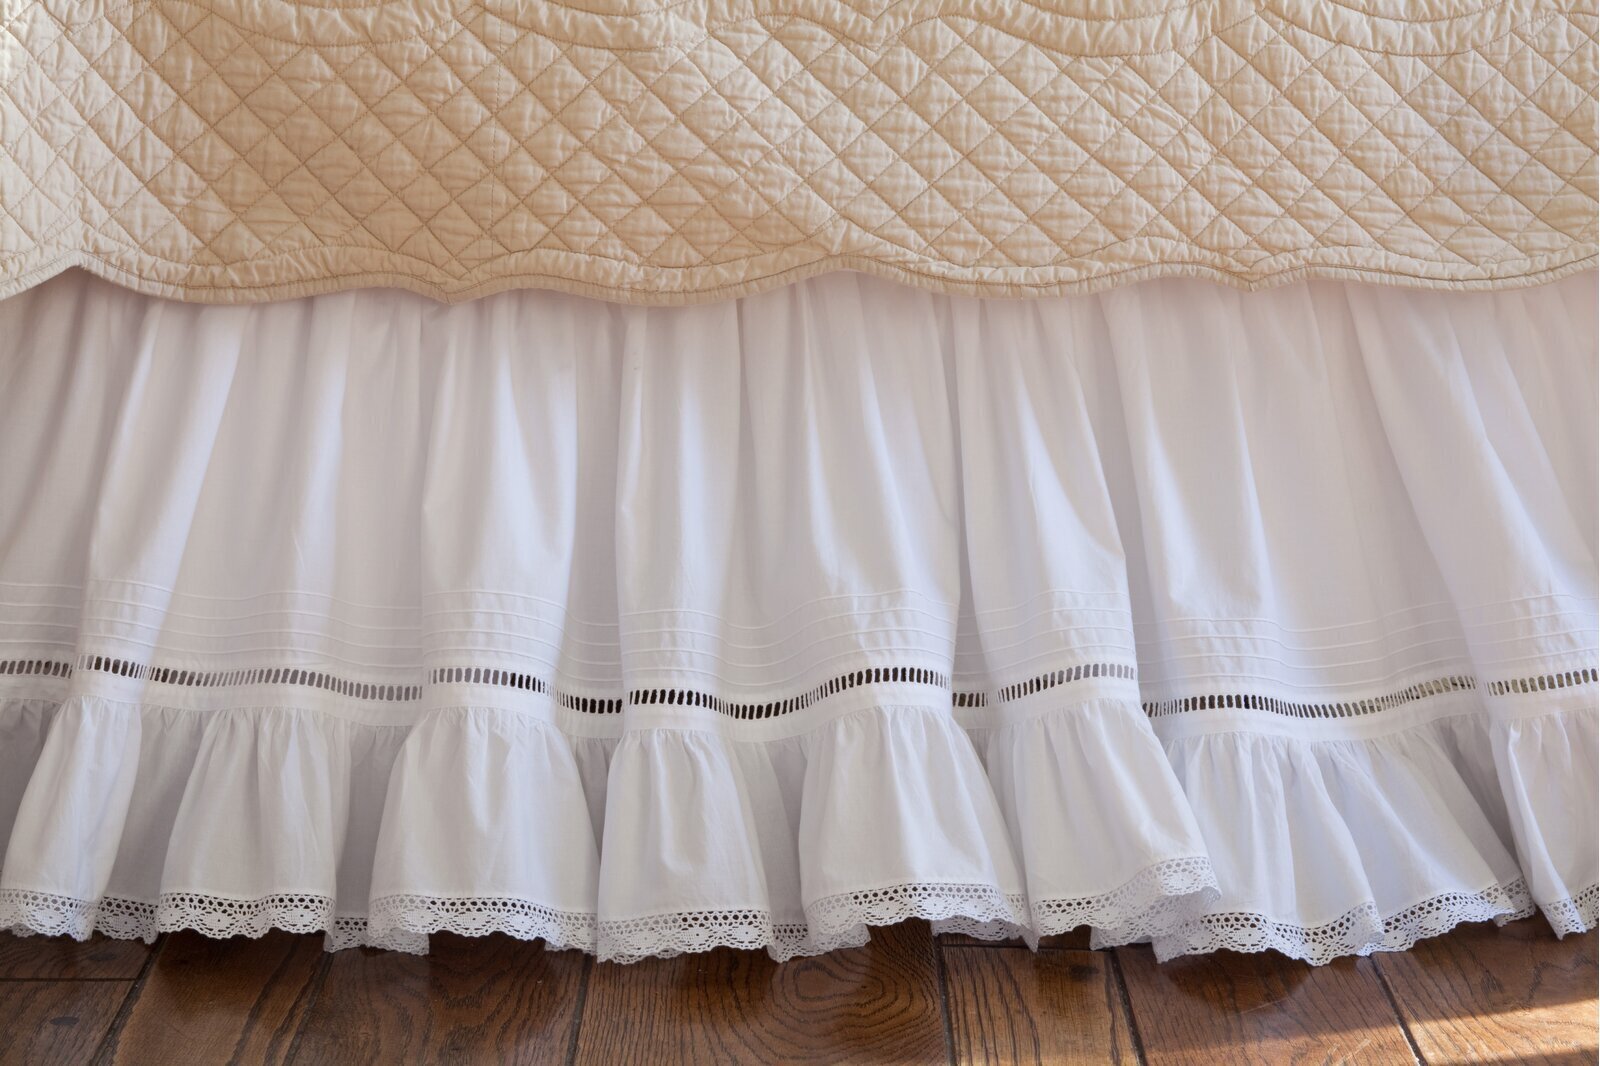 Prairie lace bed skirt